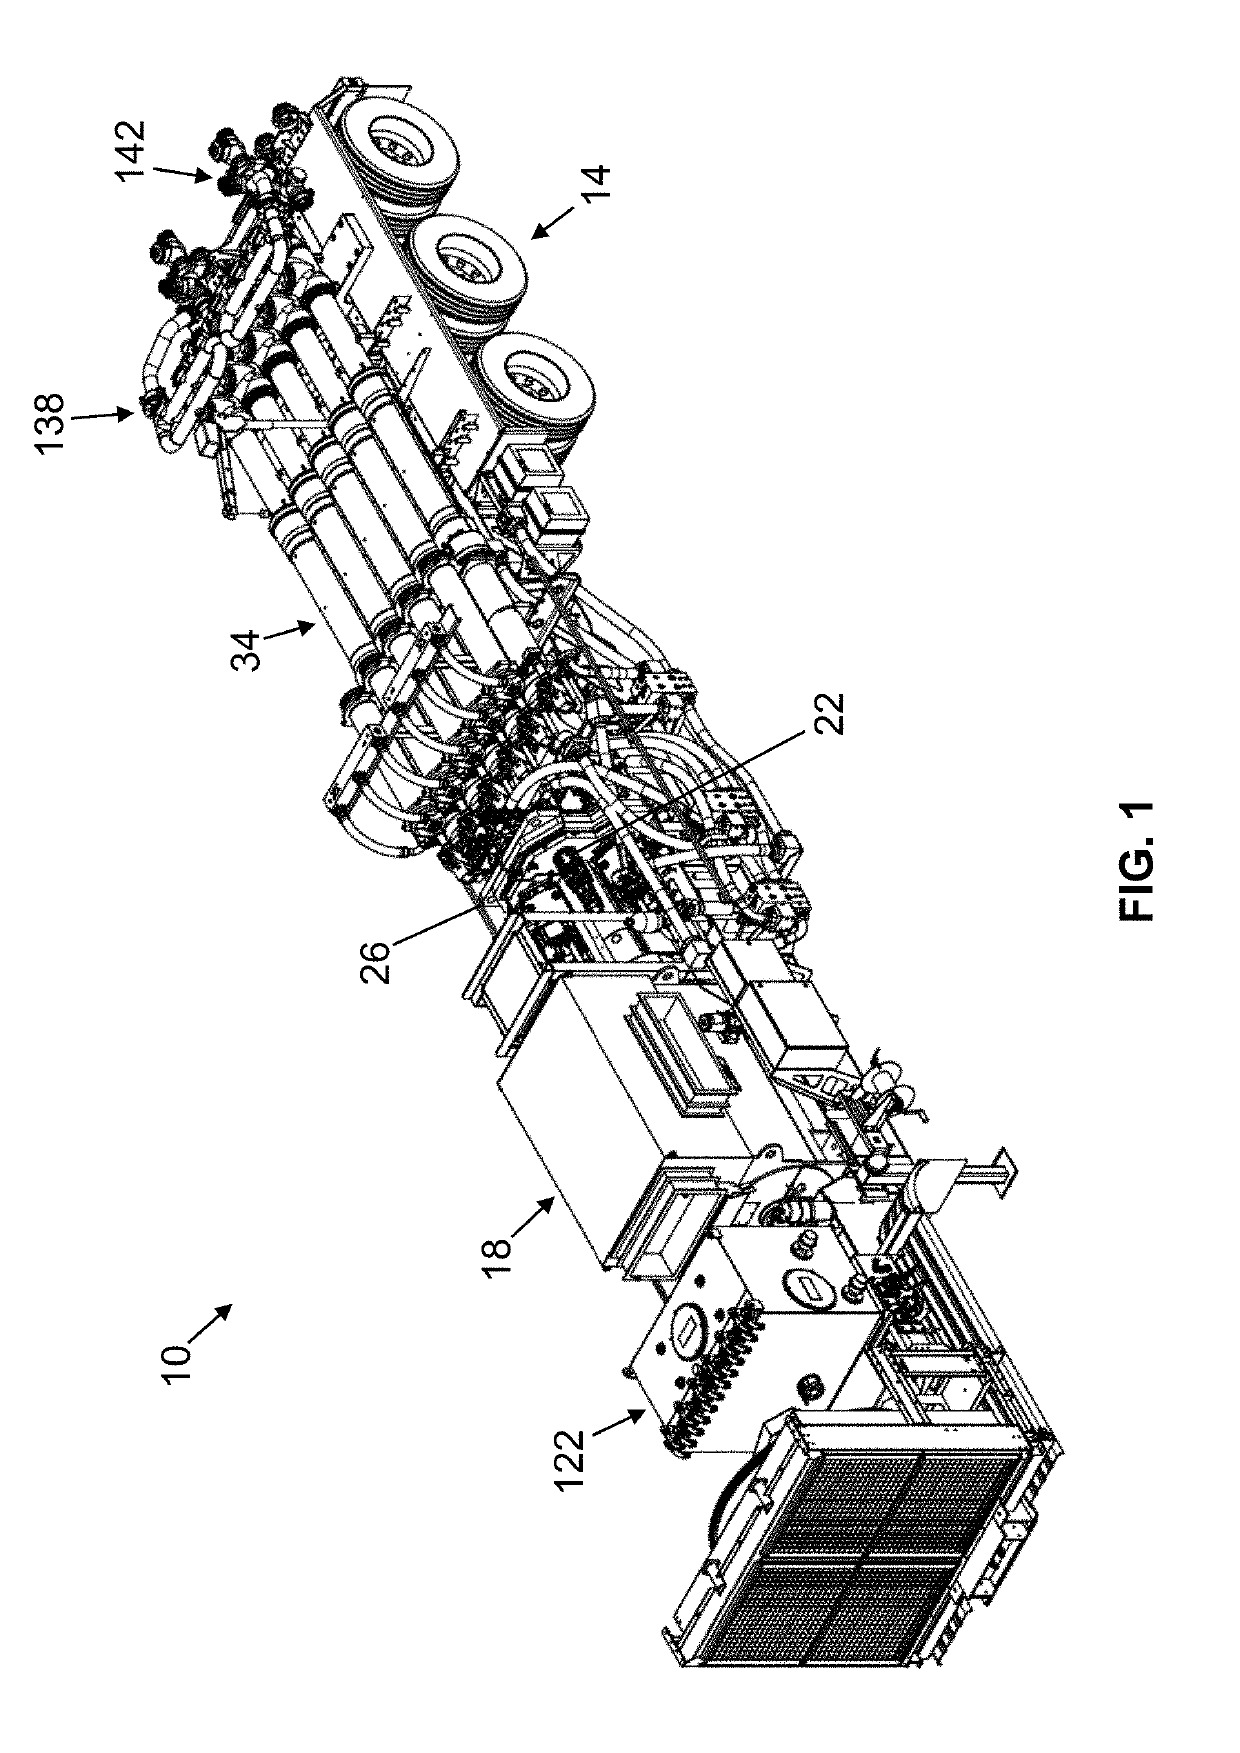 Well service pump systems and related methods